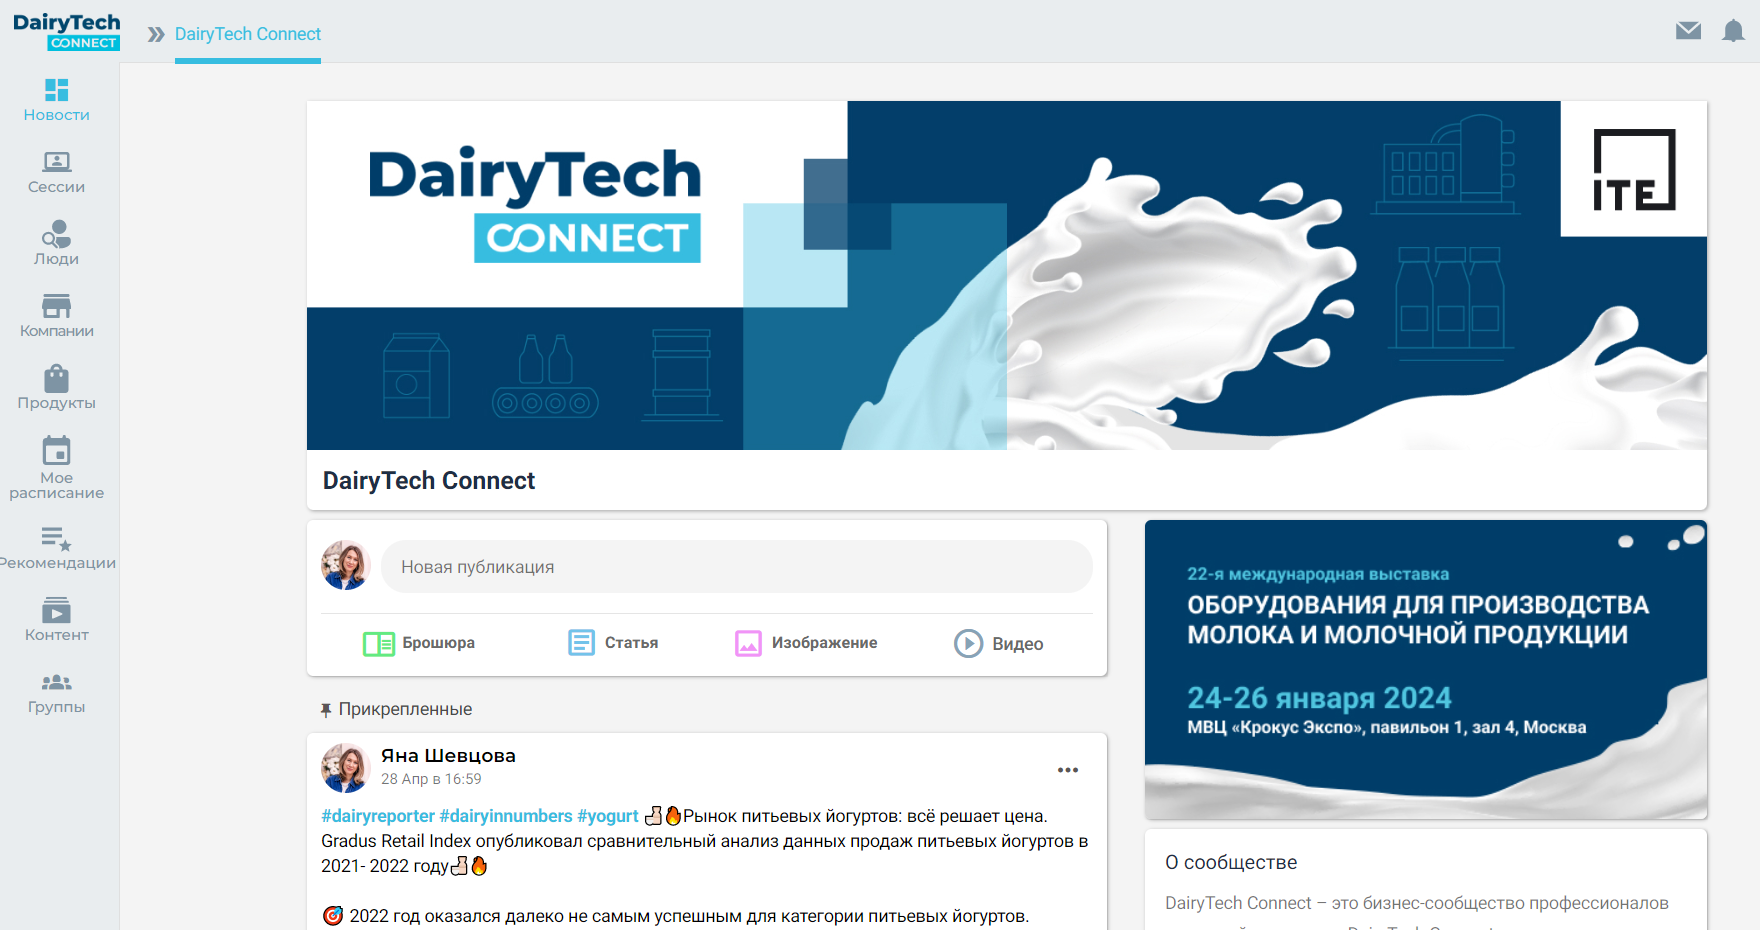 DairyTech Connect2